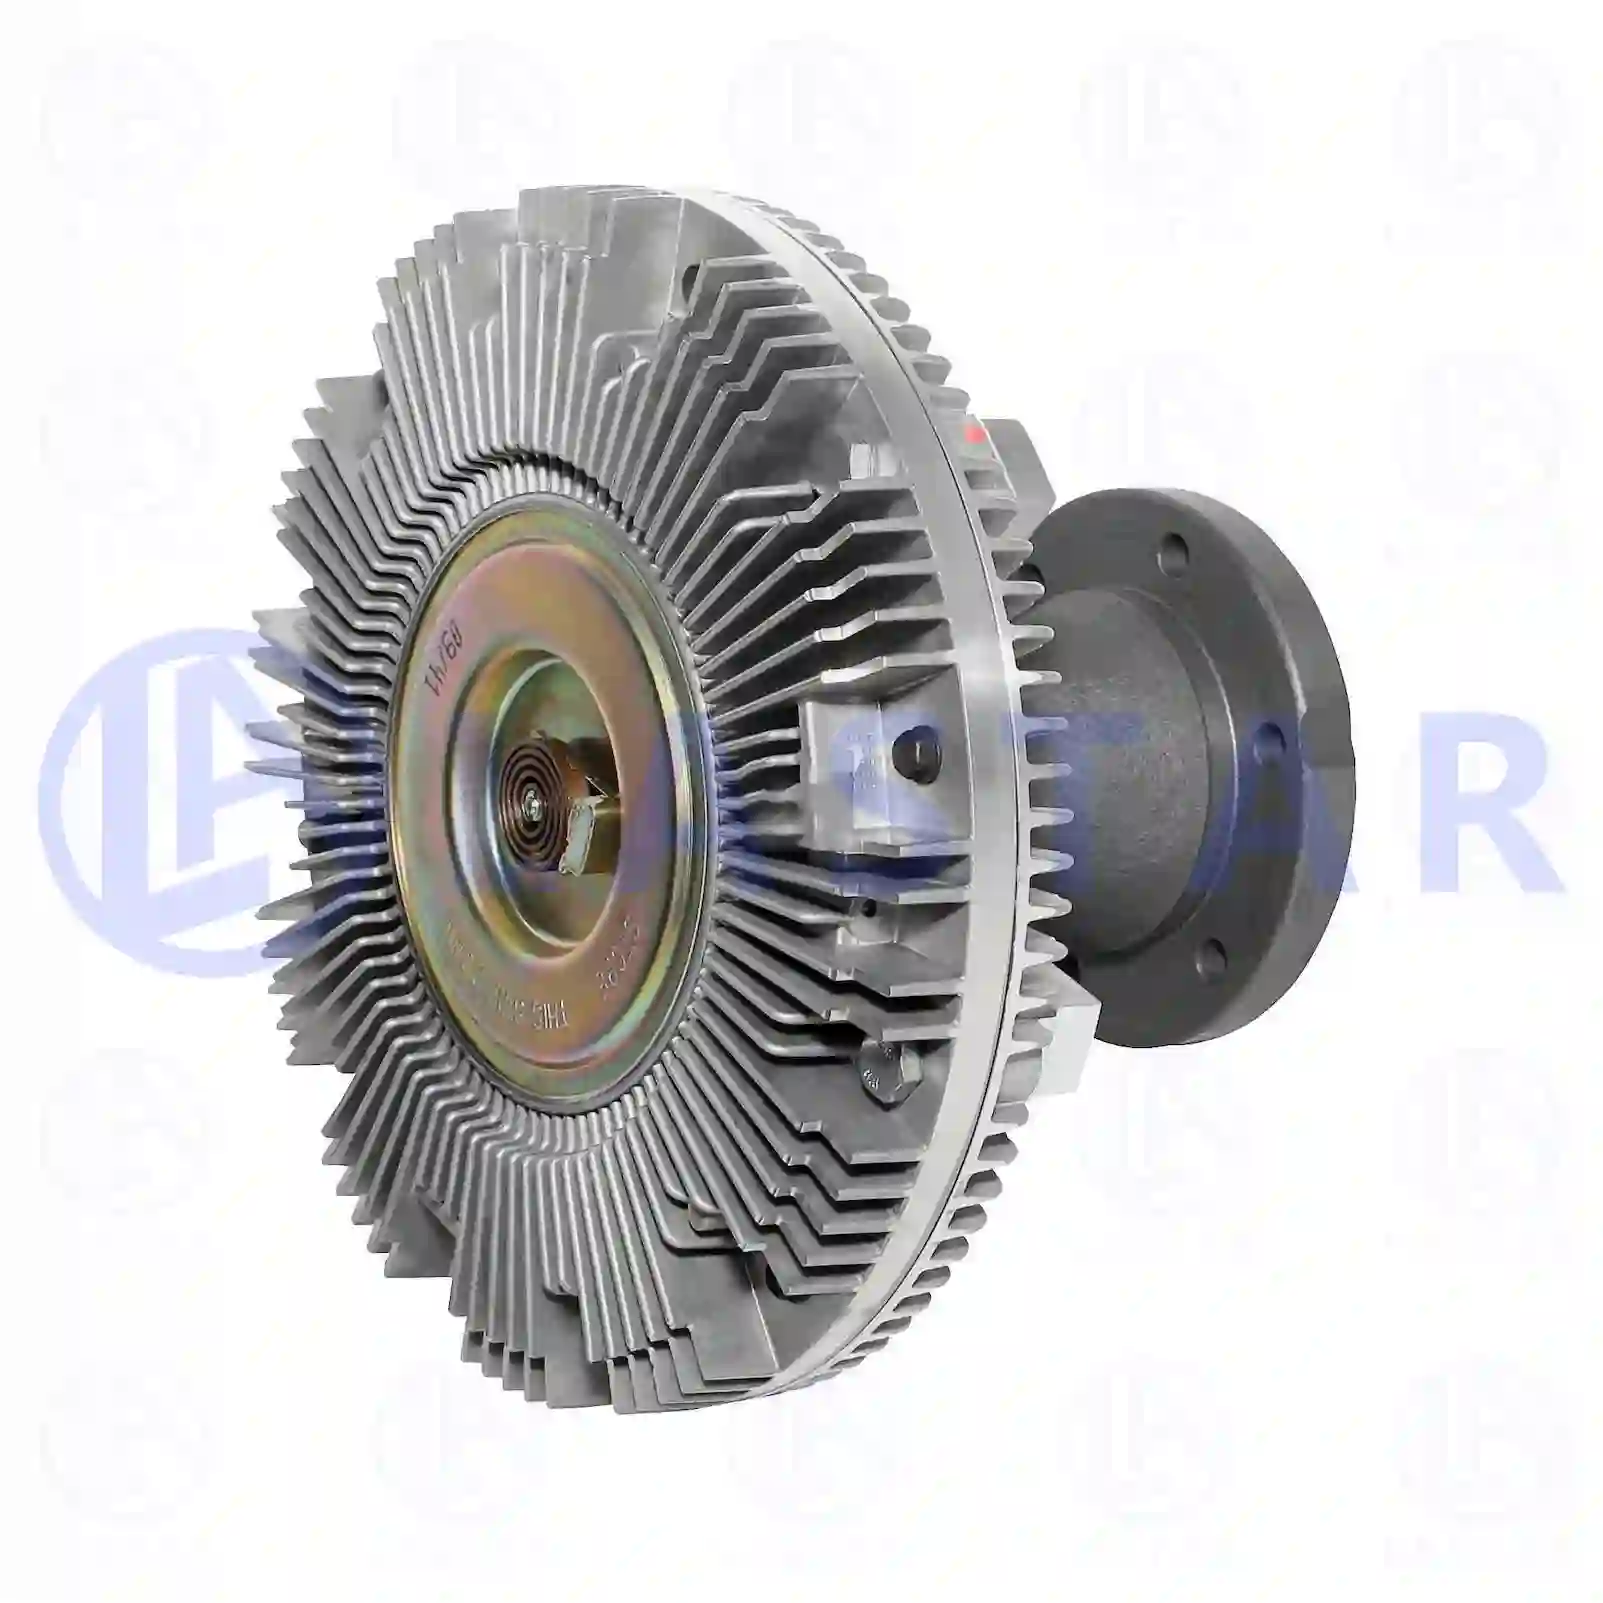 Fan clutch, 77708636, 1449678, 1449679 ||  77708636 Lastar Spare Part | Truck Spare Parts, Auotomotive Spare Parts Fan clutch, 77708636, 1449678, 1449679 ||  77708636 Lastar Spare Part | Truck Spare Parts, Auotomotive Spare Parts